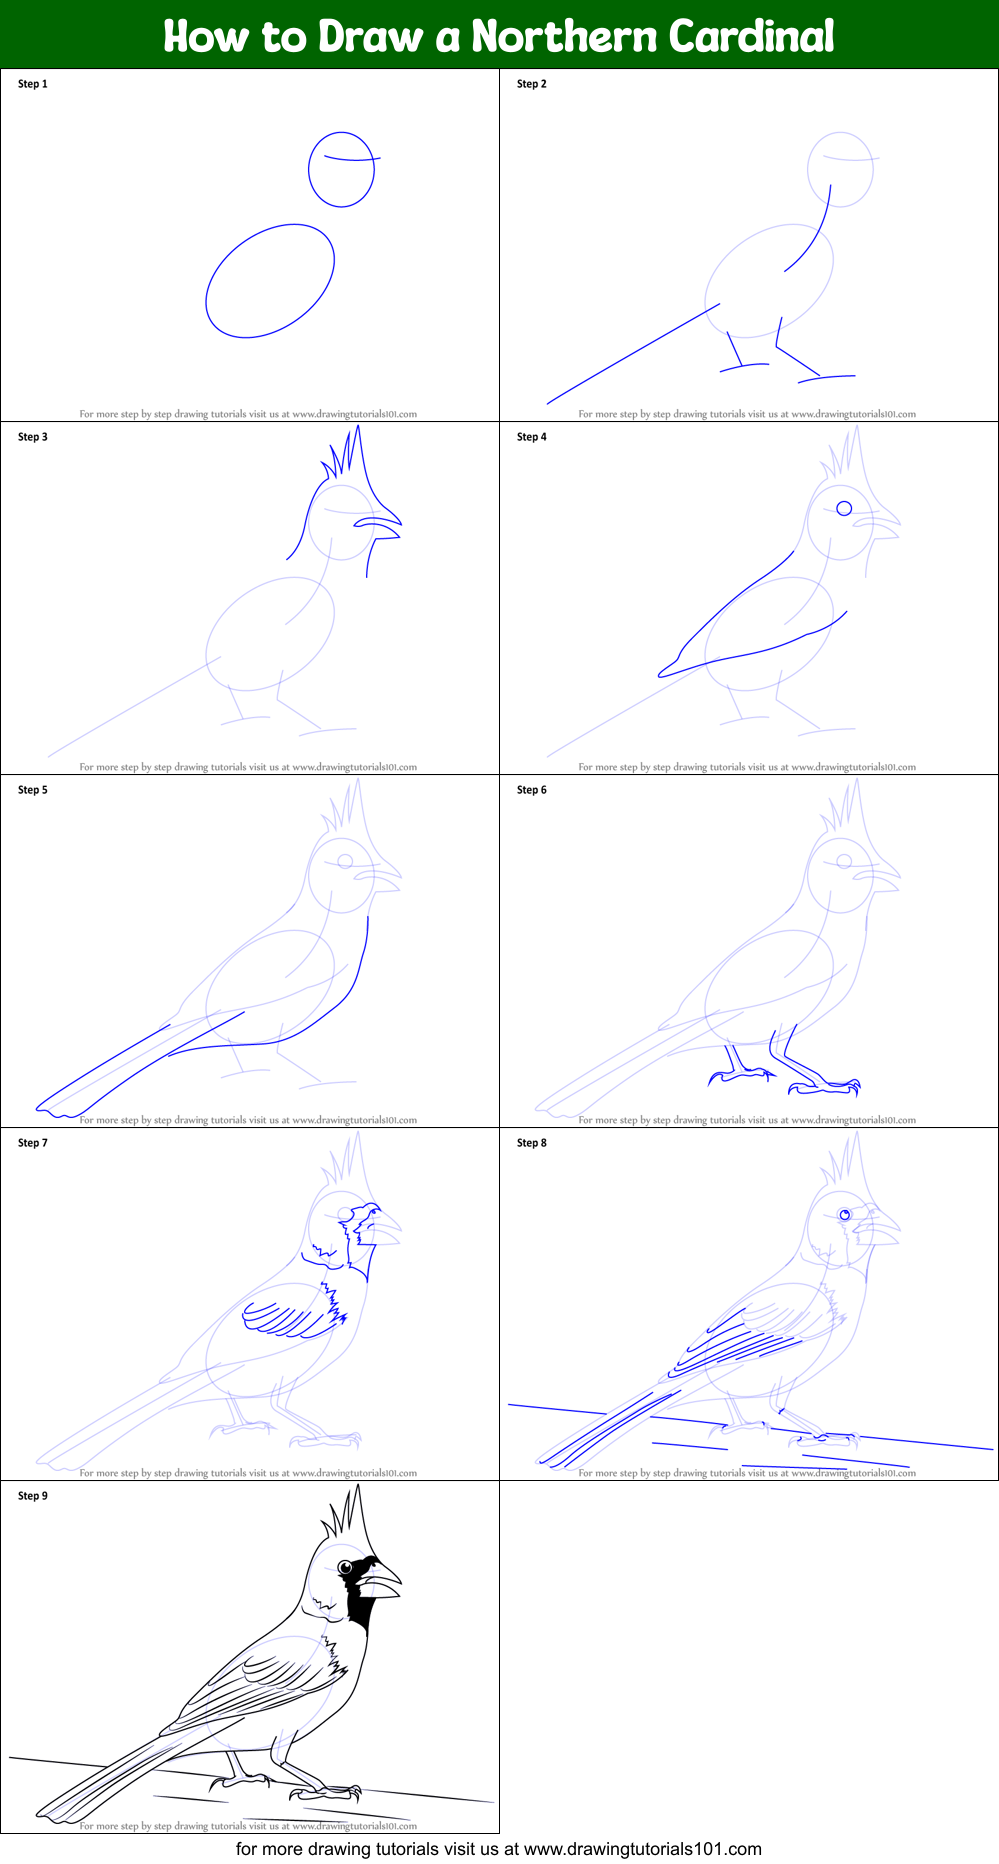 How to Draw a Northern Cardinal printable step by step